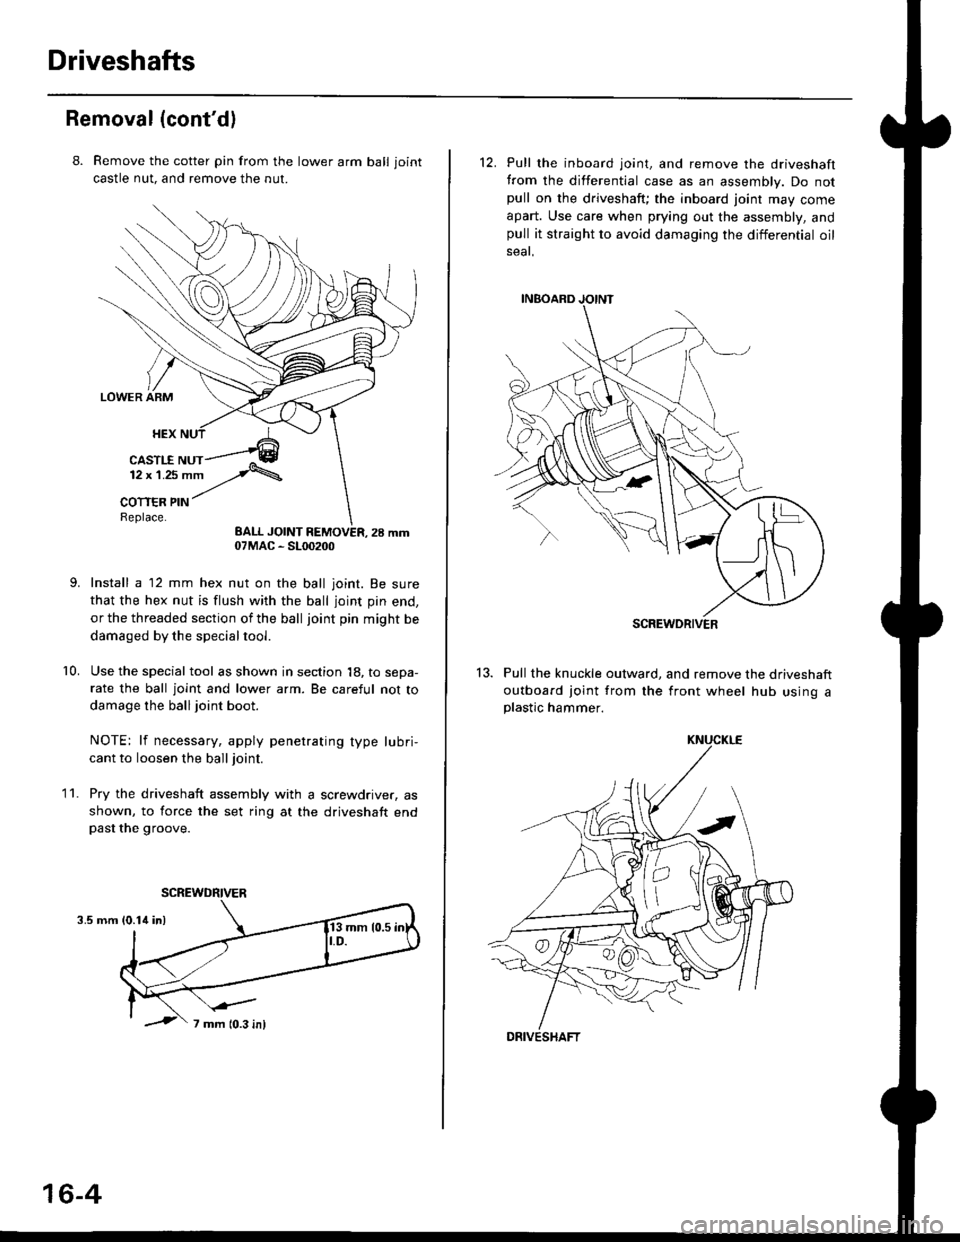 HONDA CIVIC 1996 6.G User Guide Driveshafts
Removal (contd)
8. Remove the cotter pin from the lawer arm ball joint
castle nut. and remove the nut.
Install a 12 mm hex nut on the ball joint. Be sure
that the hex nut is flush with th